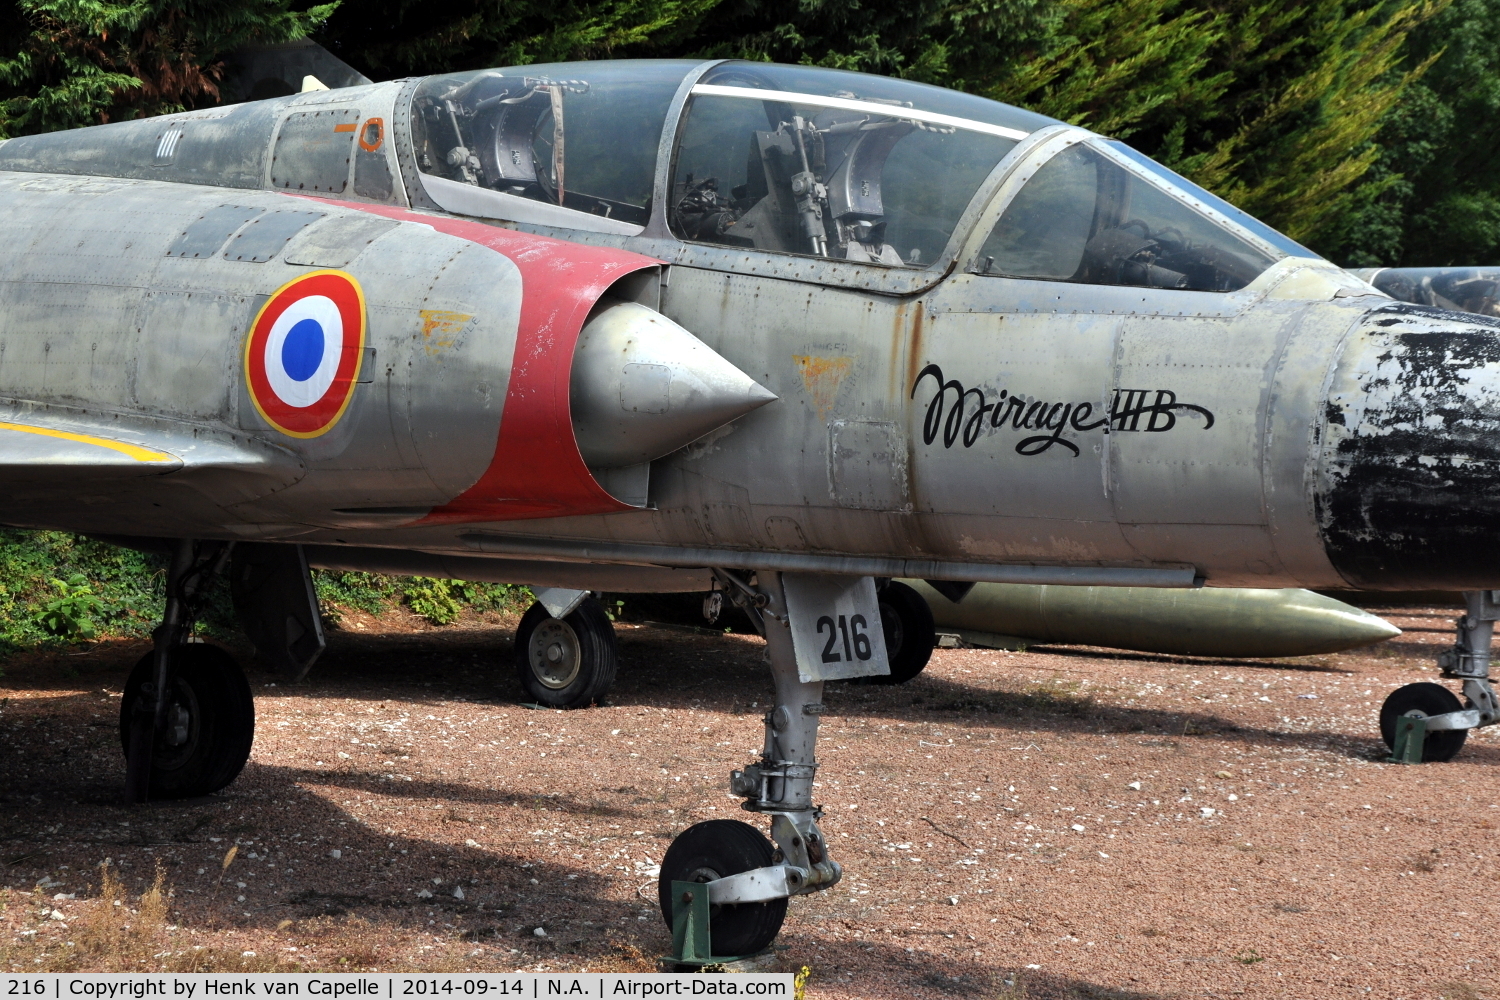 216, Dassault Mirage IIIB C/N 216, Dassault Mirage IIIB two-seater fighter of the French Air Force at the Chateau de Savigny aircraft museum.